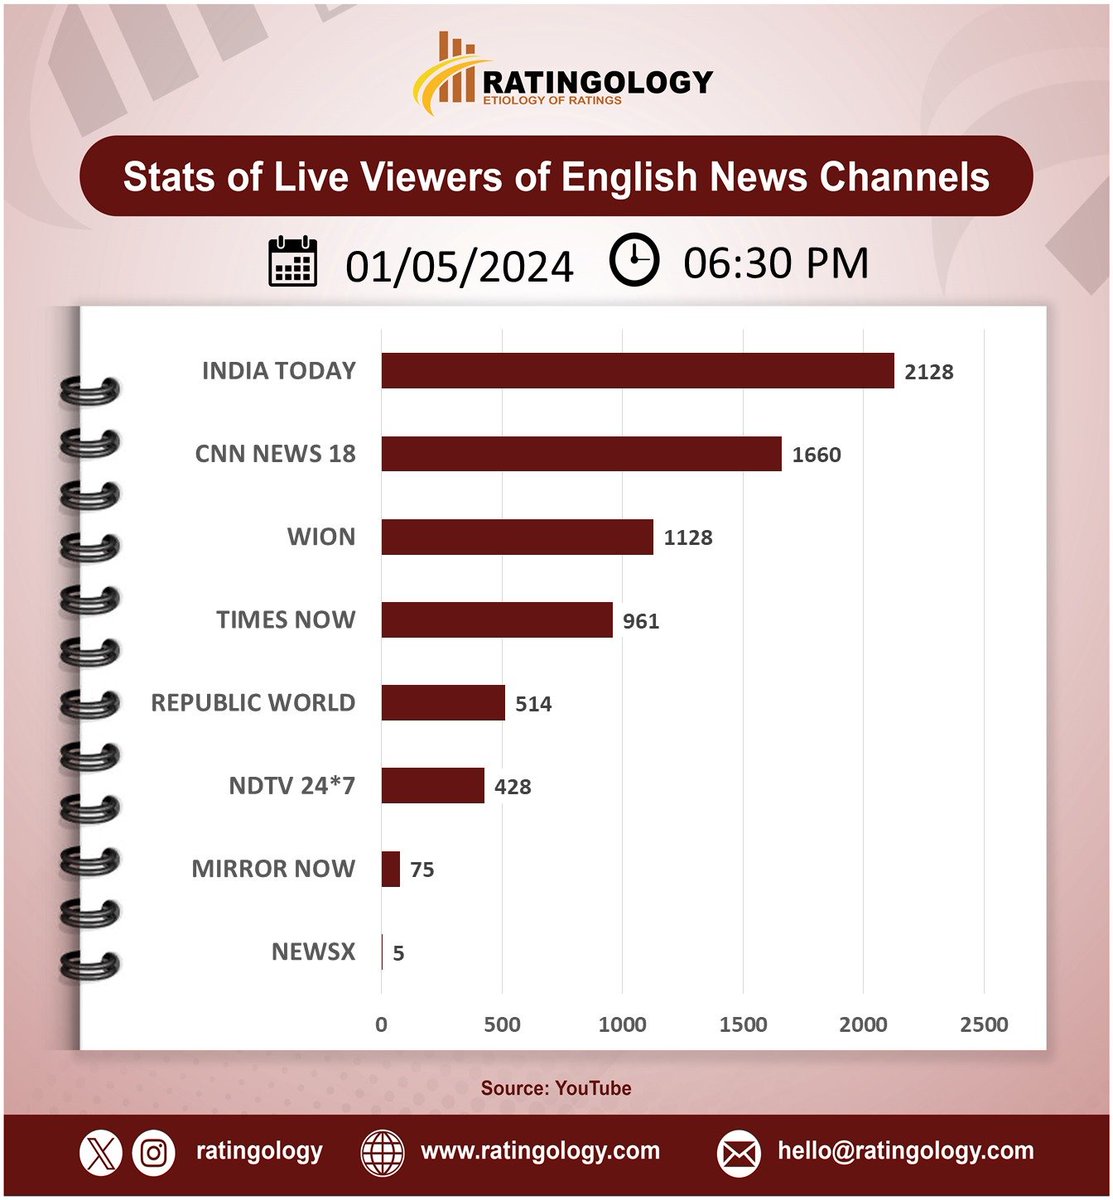 𝐒𝐭𝐚𝐭𝐬 𝐨𝐟 𝐥𝐢𝐯𝐞 𝐯𝐢𝐞𝐰𝐞𝐫𝐬 𝐨𝐧 #Youtube of #EnglishMedia #channelsat 06:30pm, Date: 01/May/2024  #Ratingology #Mediastats #RatingsKaBaap #DataScience #IndiaToday #Wion #RepublicTV #CNNNews18 #TimesNow #NewsX #NDTV24x7 #MirrorNow